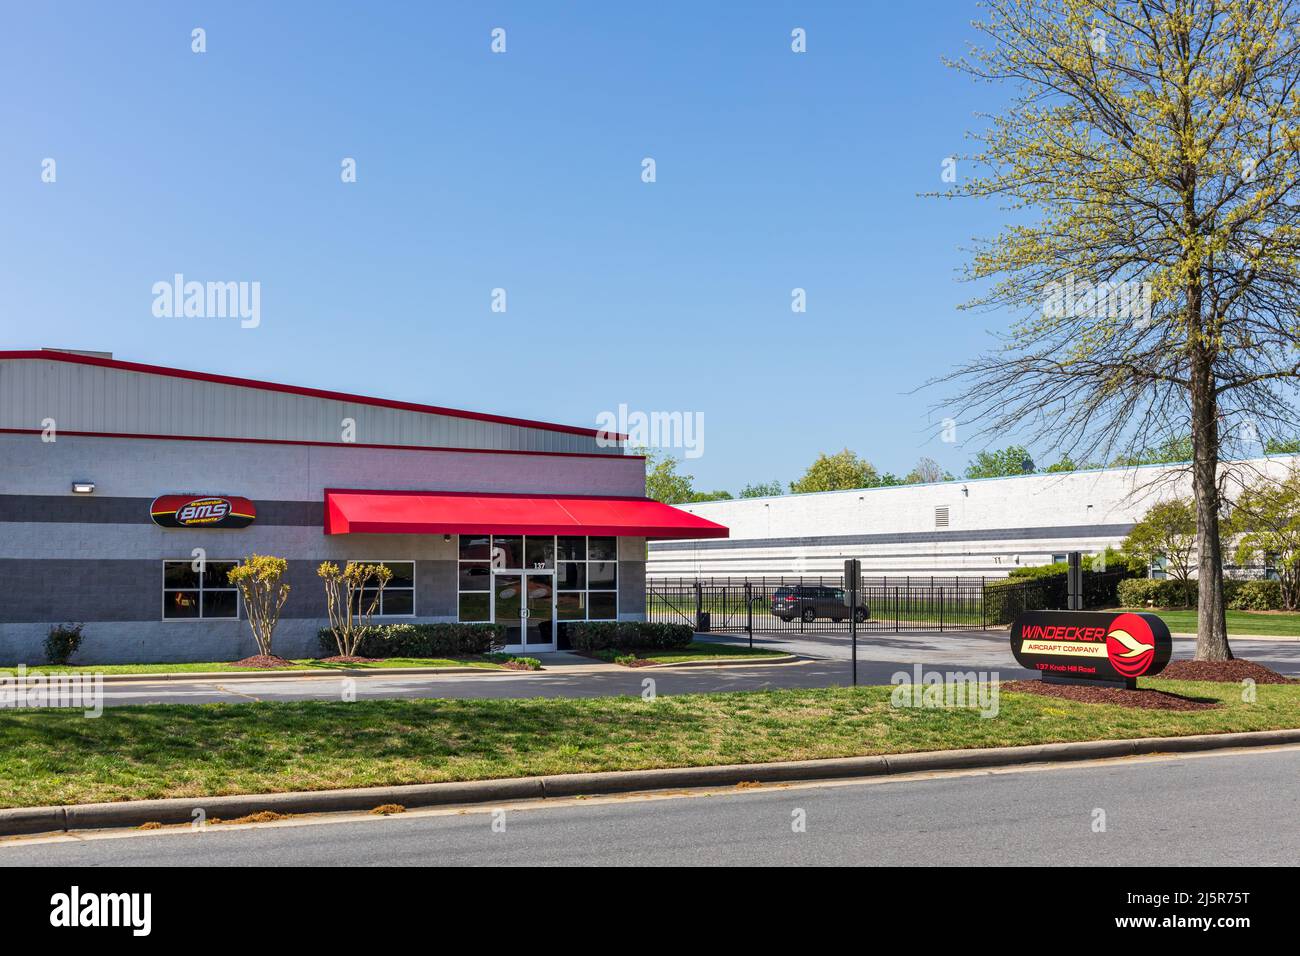 MOORESVILLE, NC, USA-17 APRIL 2022: Windecker aircraft Company and Brandonbilt Motor Sports, building and signs, bright sunny, spring day. Stock Photo